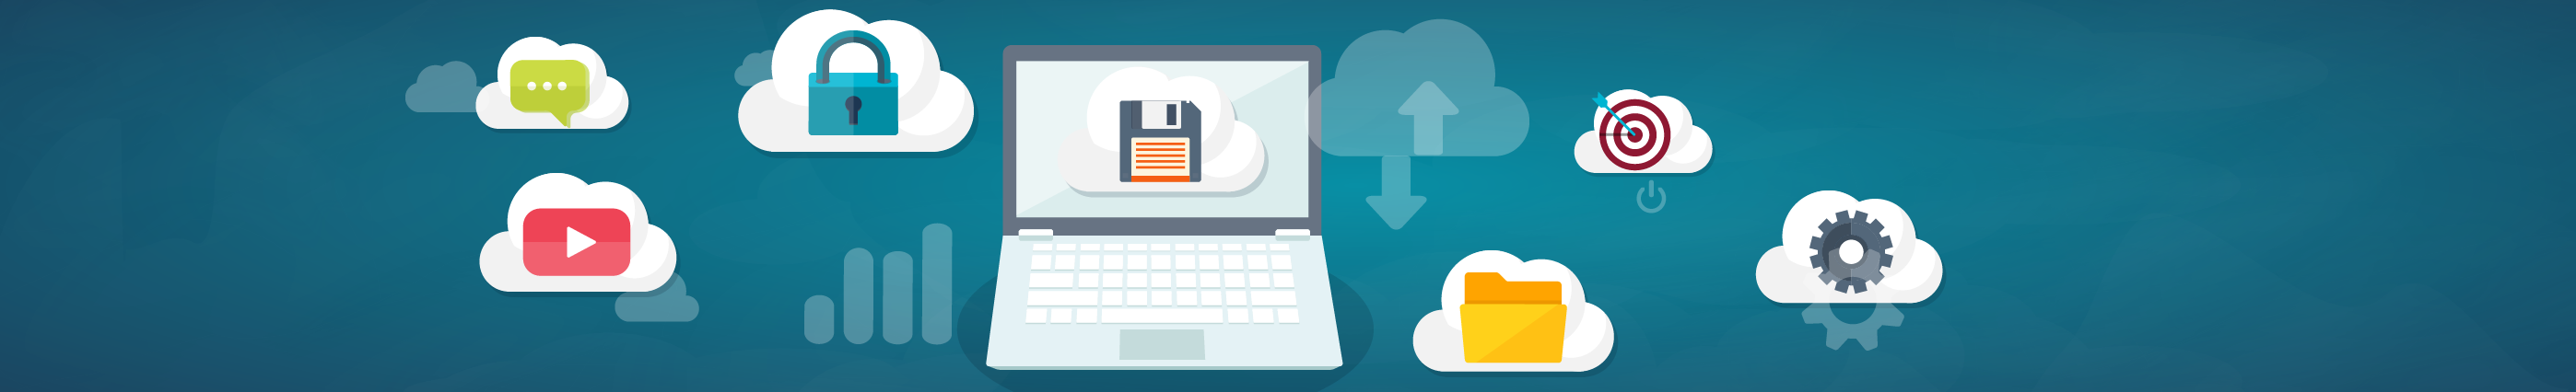 Cloud computing illustration: Data storage device, media server. Web hosting and cloud technology. Data protection, database security. Backup, copy, migrate data between cloud storage services.